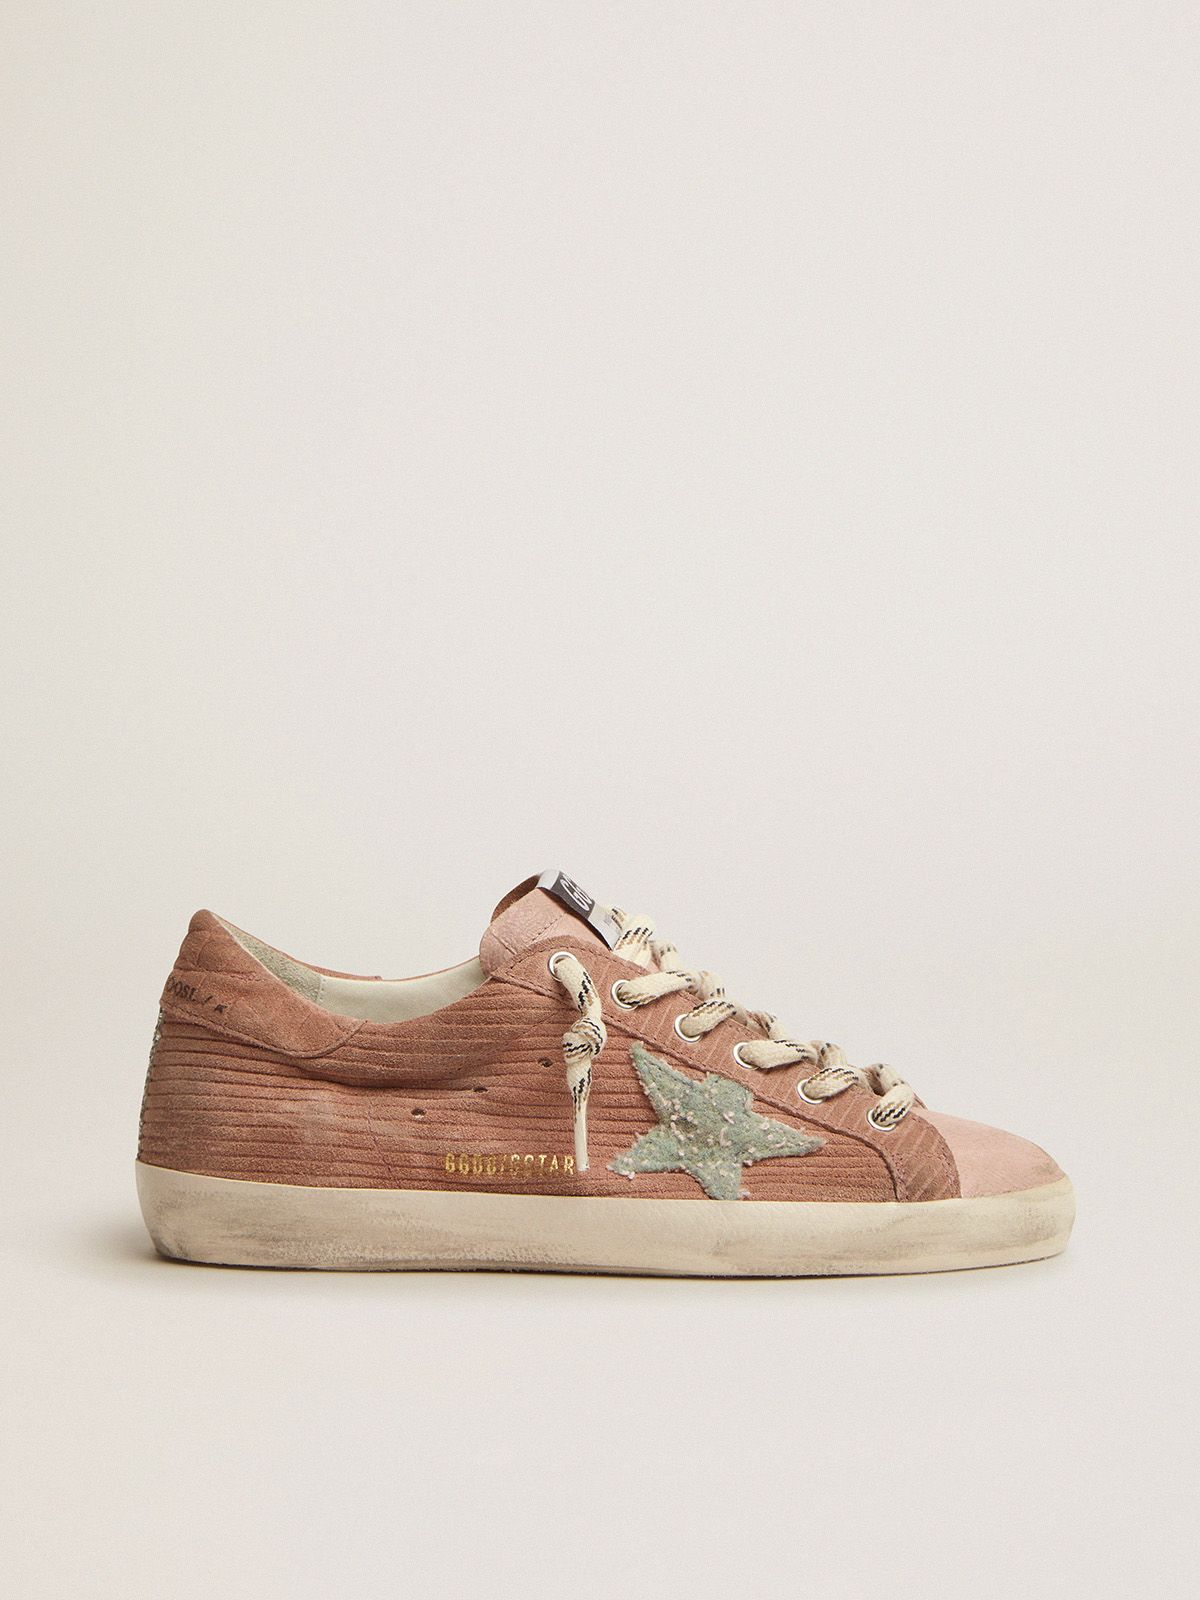 Super-Star sneakers in peach-pink suede with corduroy print and bouclé star